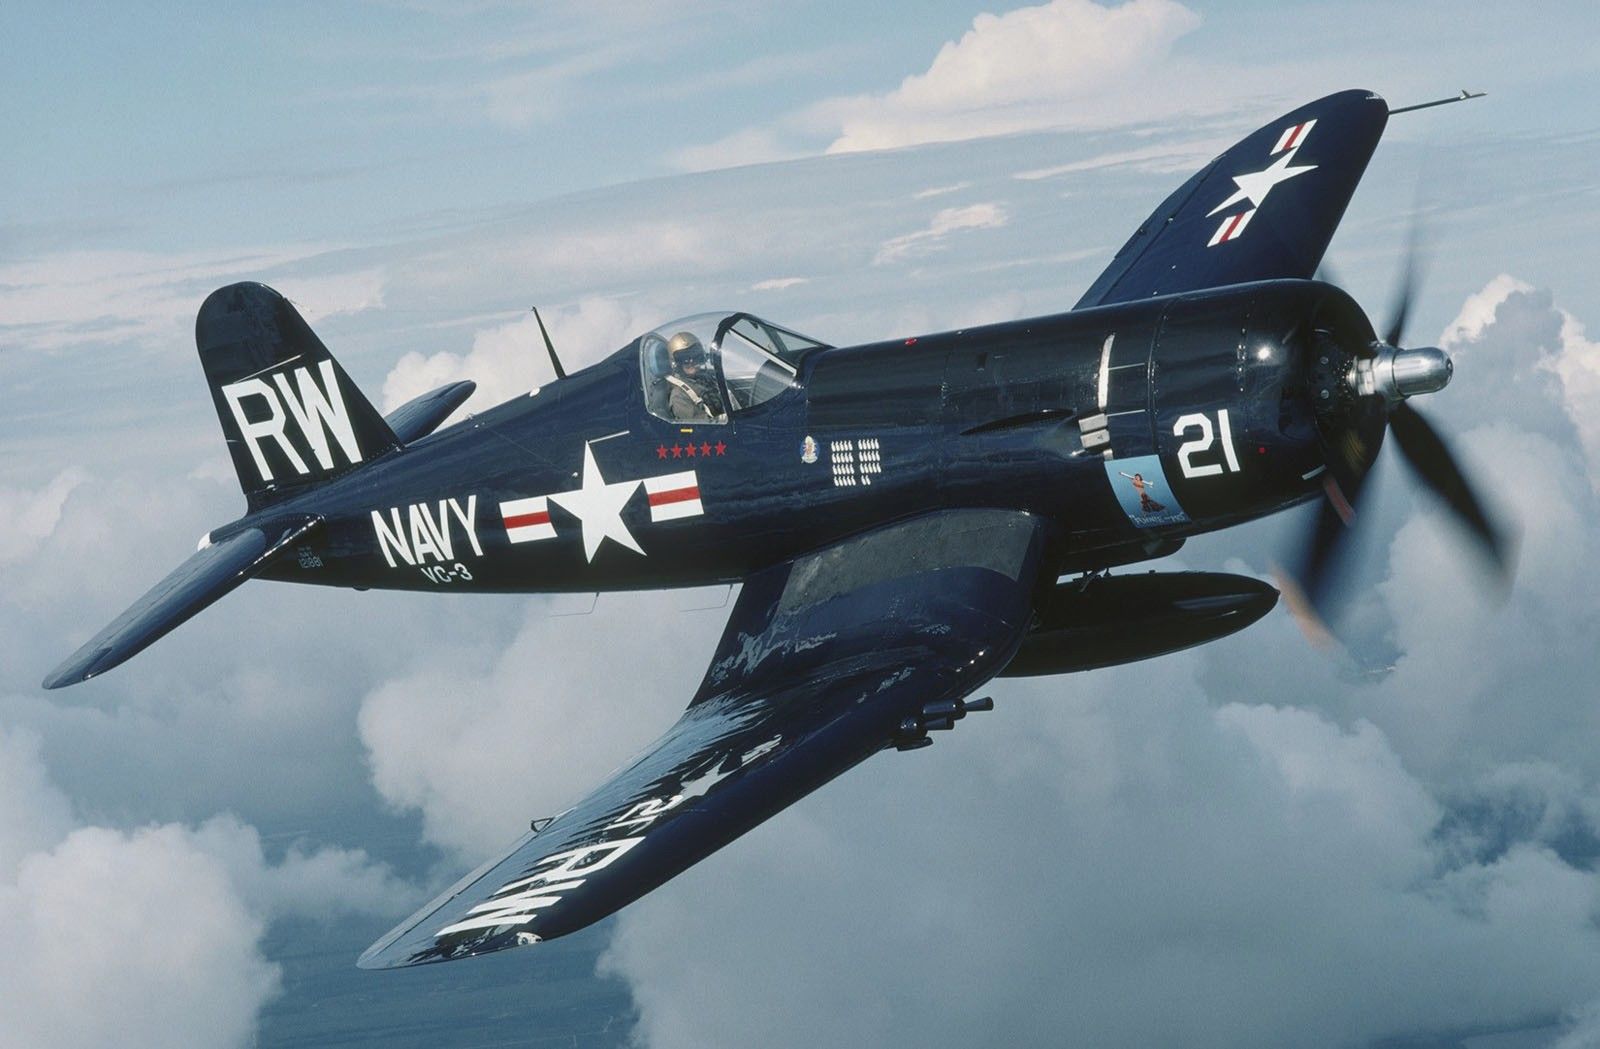 Vought F4U Corsair wallpapers HD  Download Free backgrounds